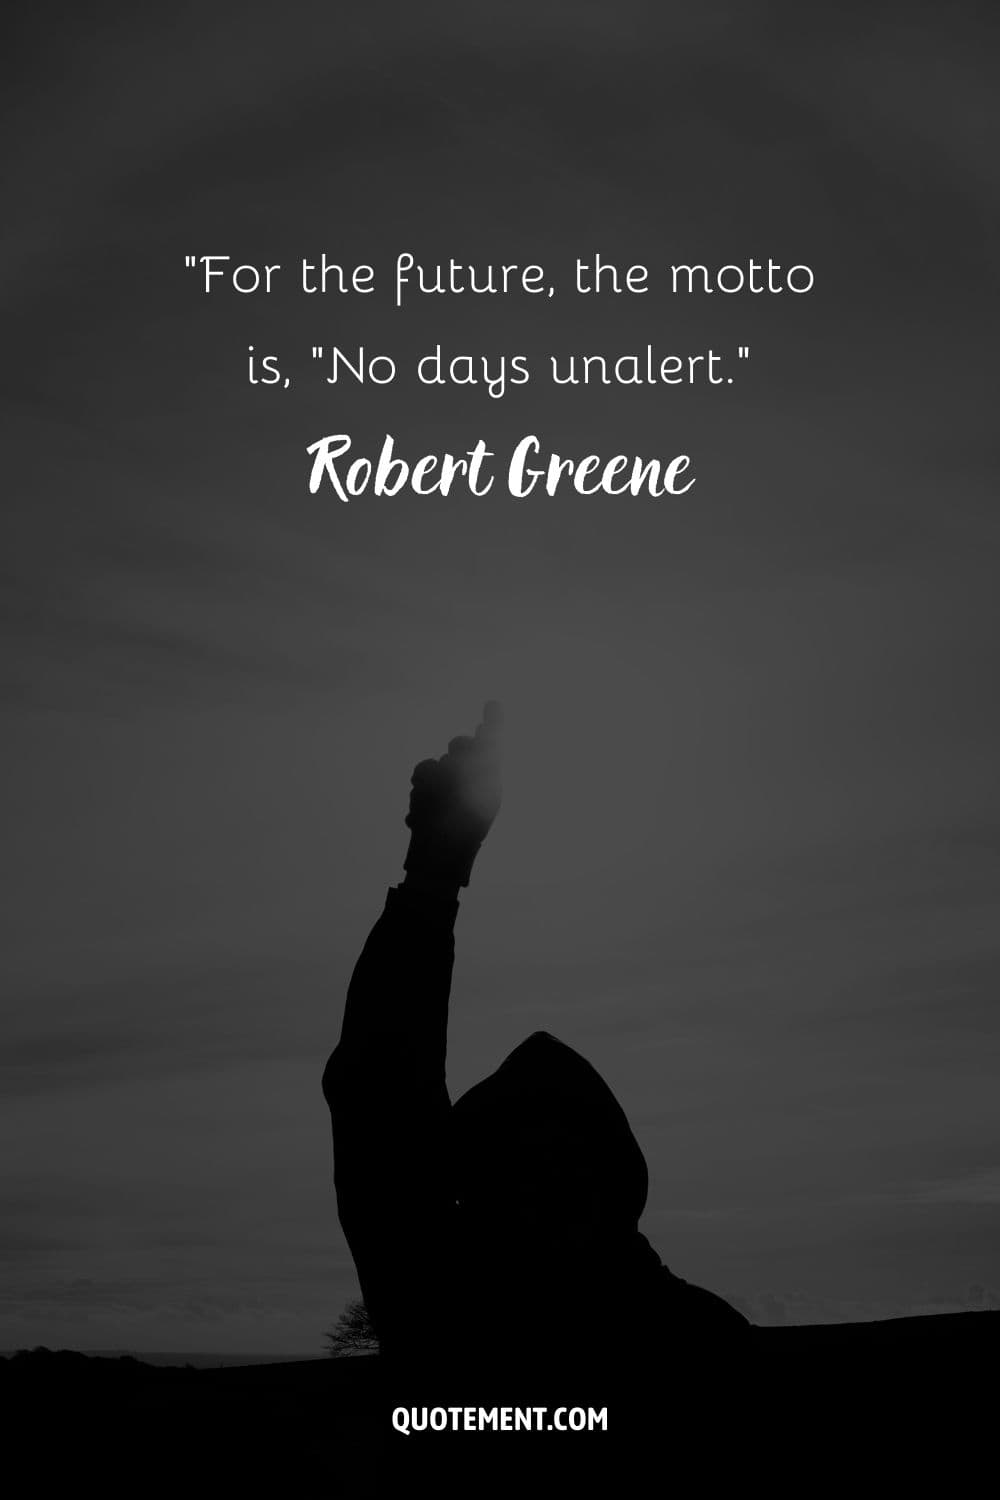 “For the future, the motto is, No days unalert.” ― Robert Greene, The 48 Laws of Power